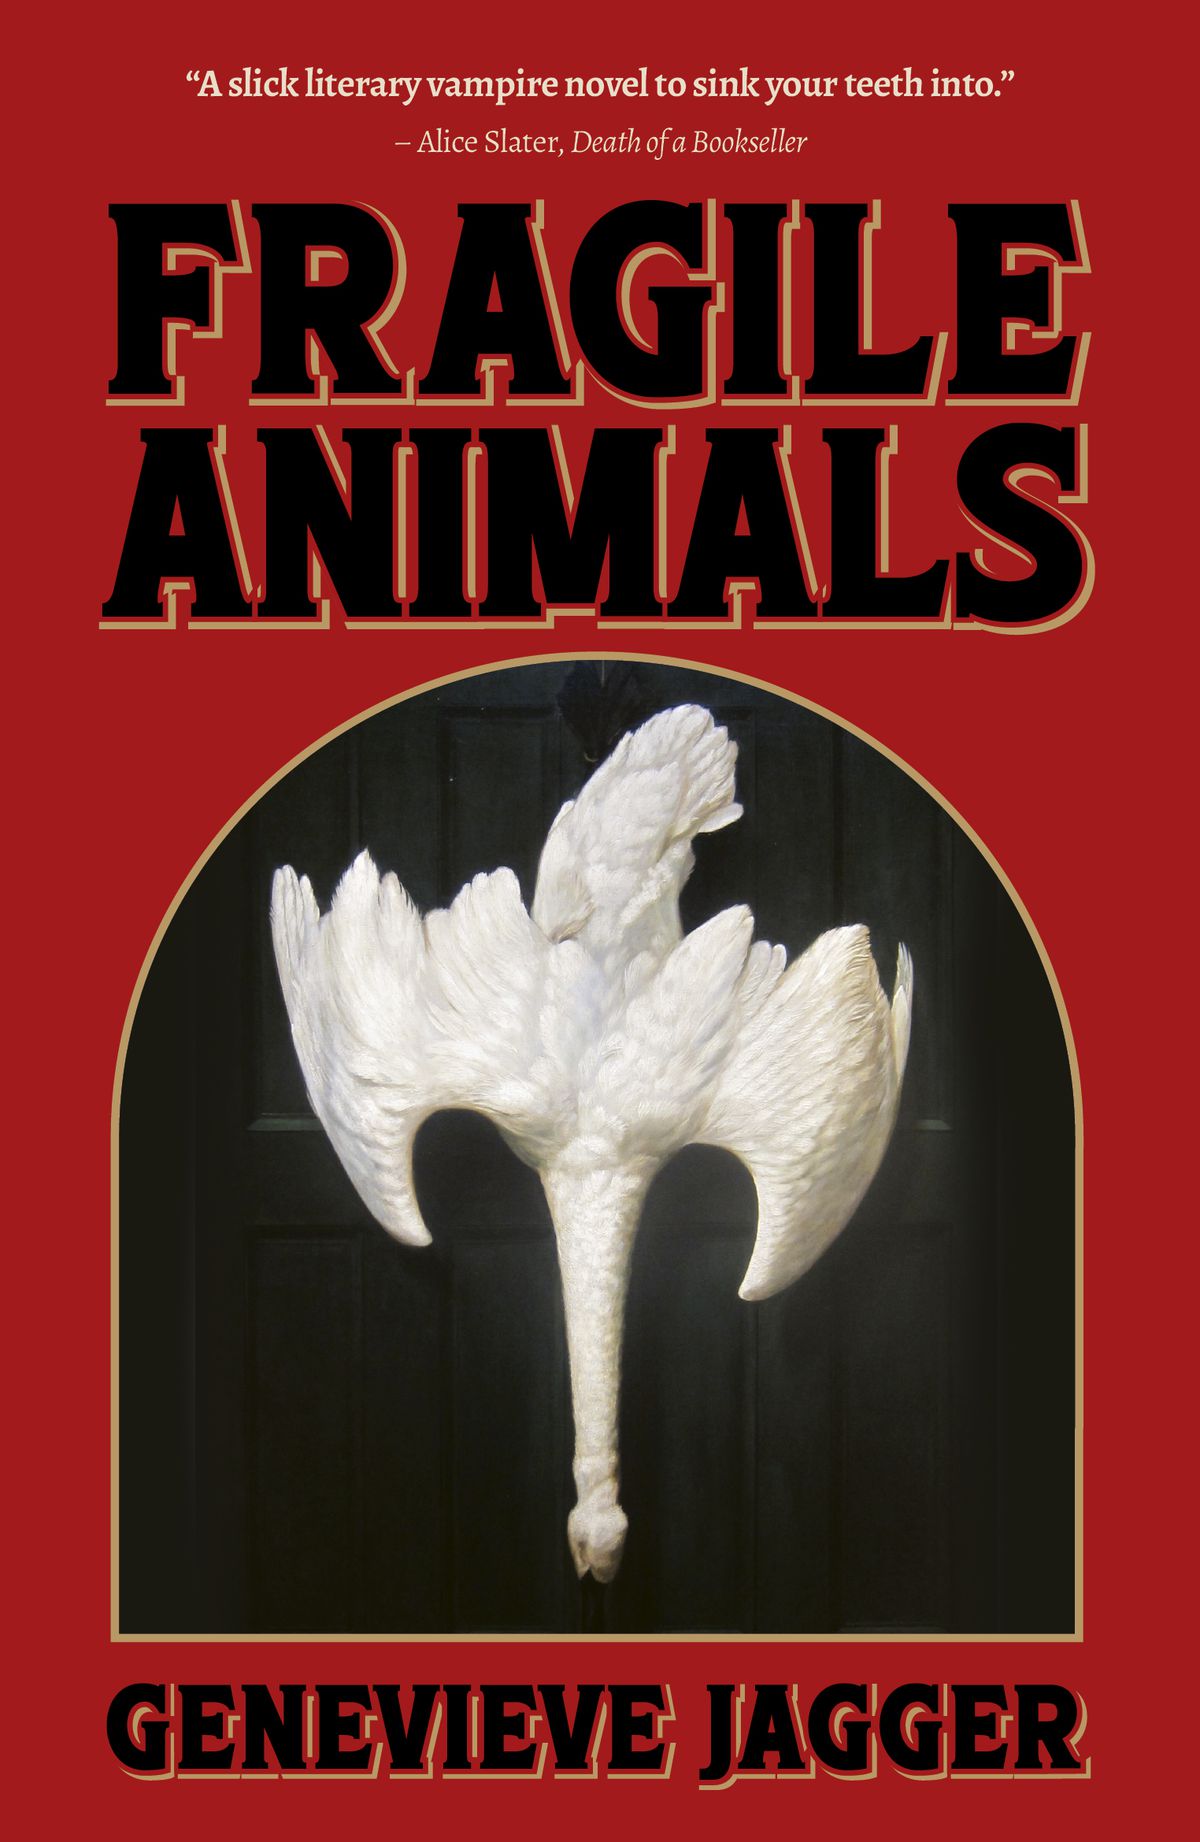 The Fragile Animals book cover hints at the vampire story inside.